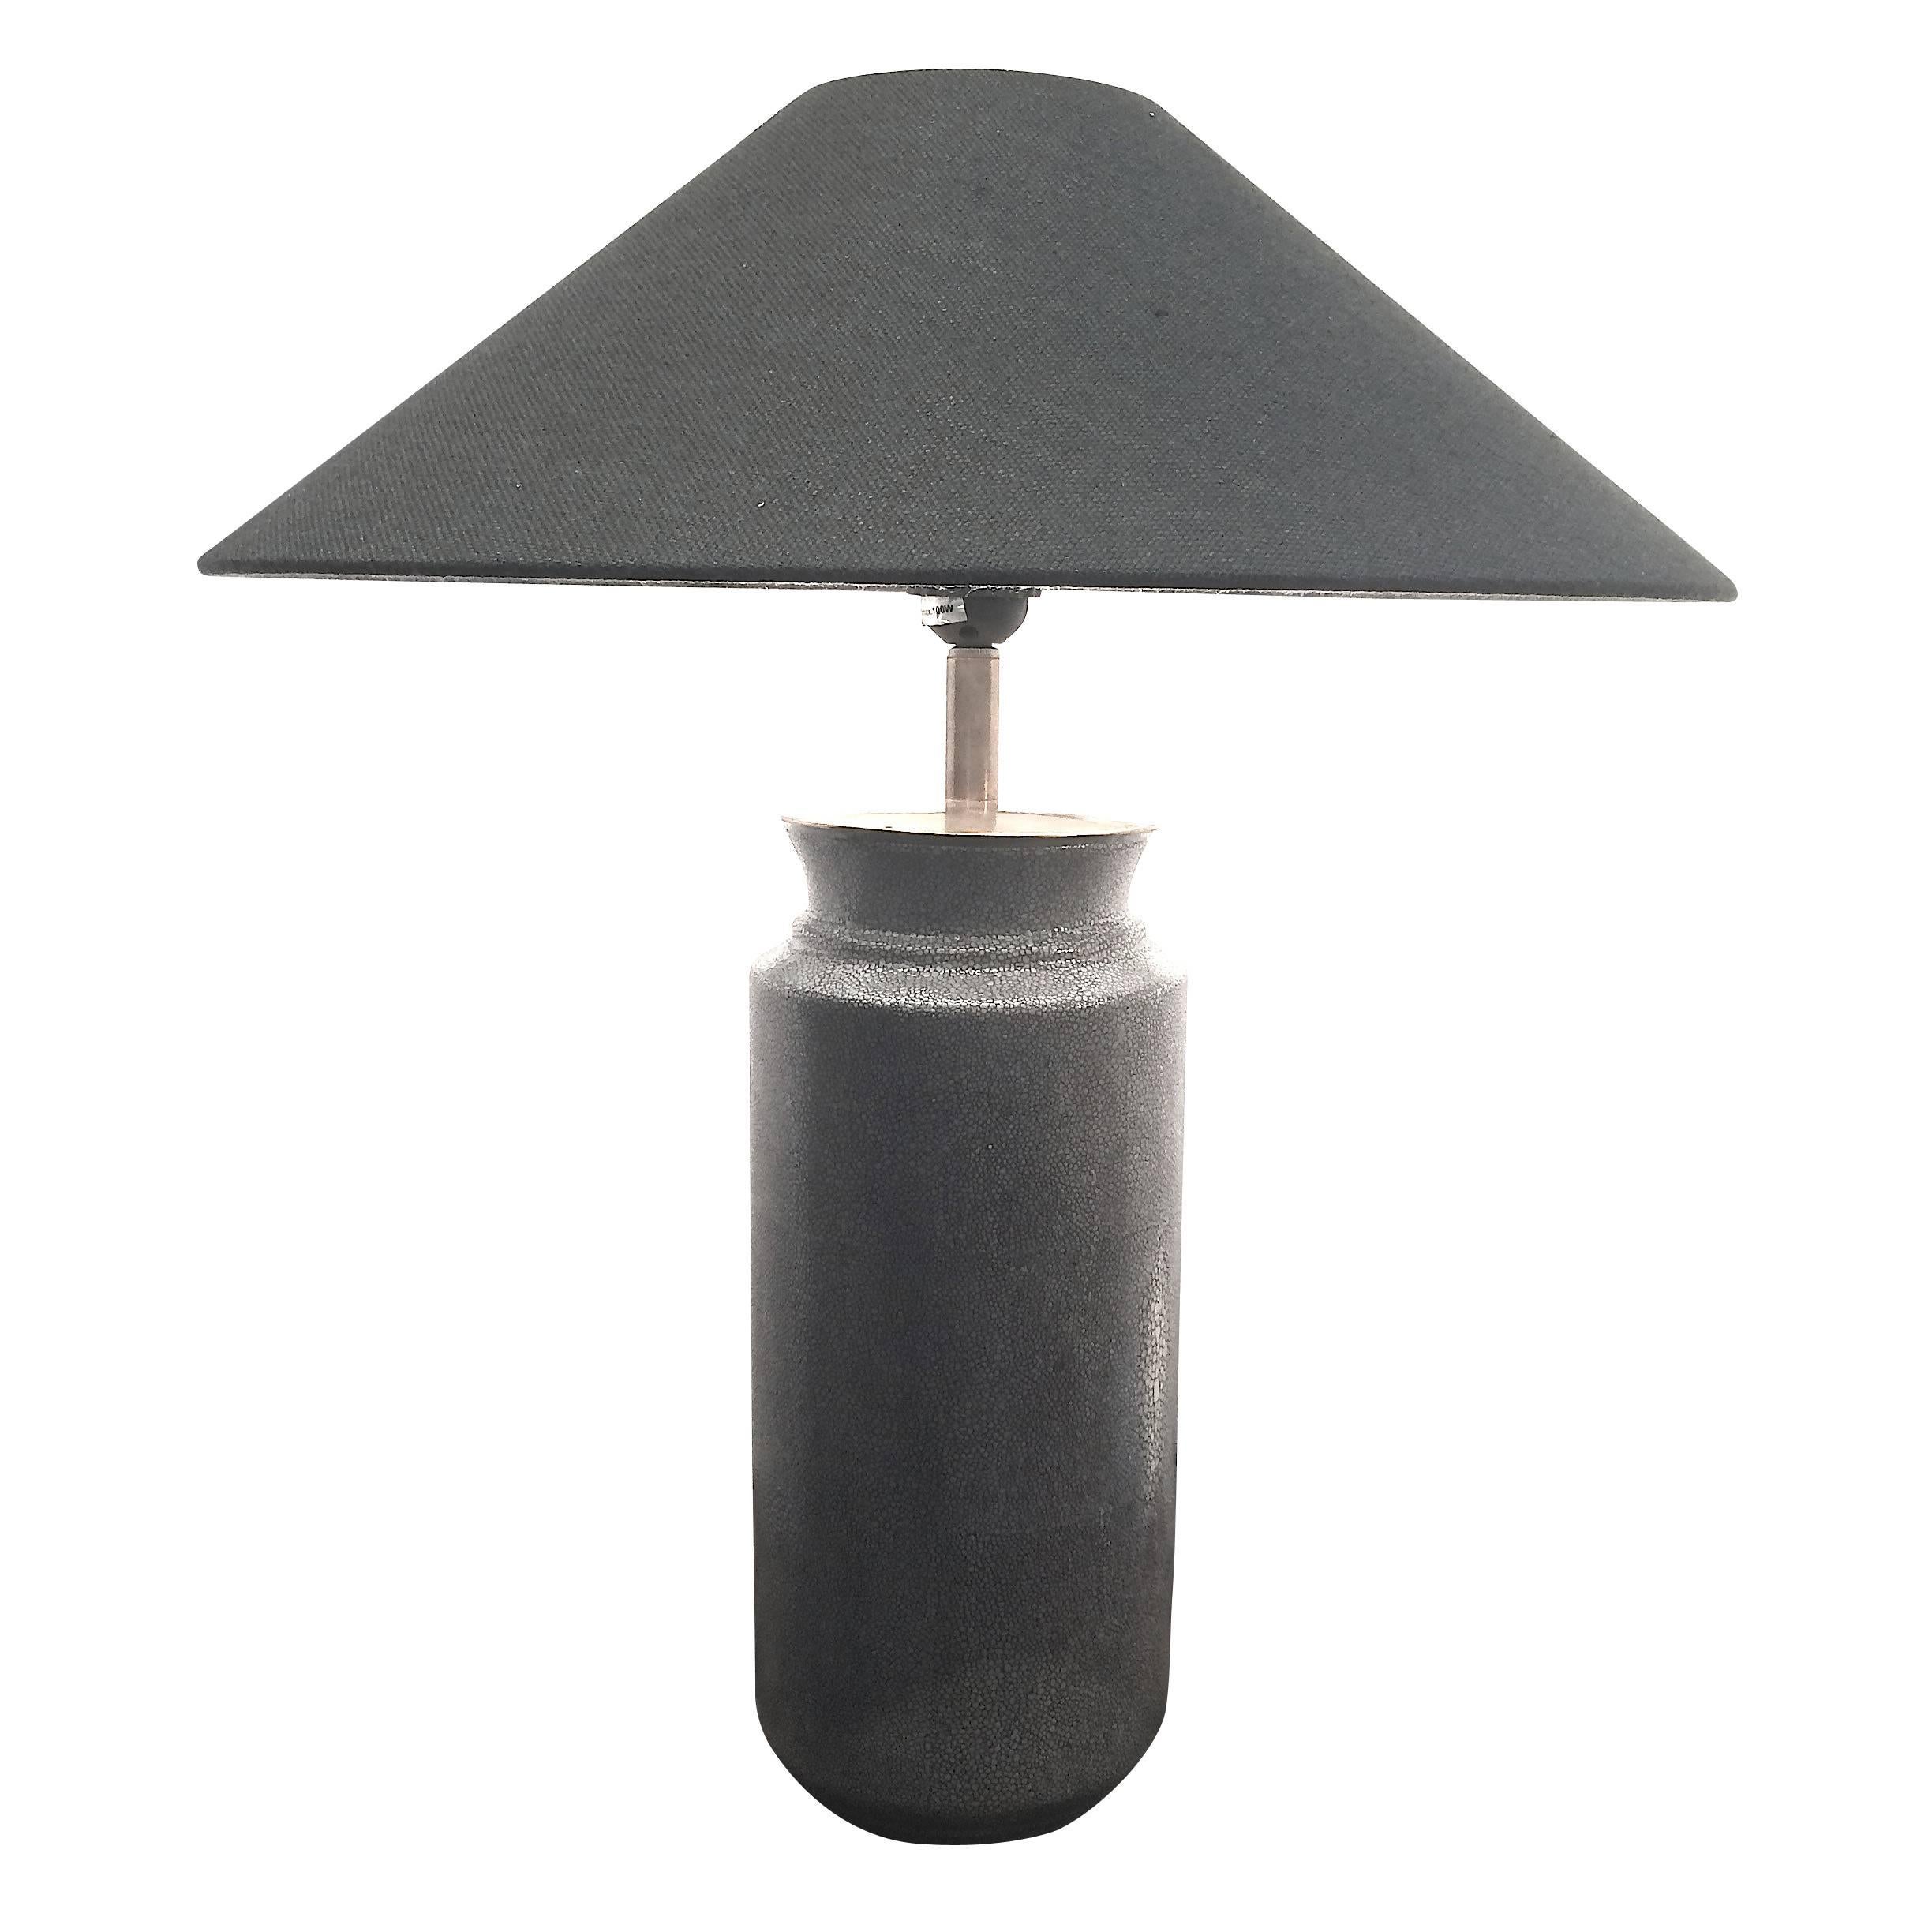 Grey faux shagreen contemporary Chinese pair of cylinder shaped table lamps.
The faux shagreen pattern is etched onto a porcelain base.
Measure: The shade is fine black Belgian linen with white interior and is 20